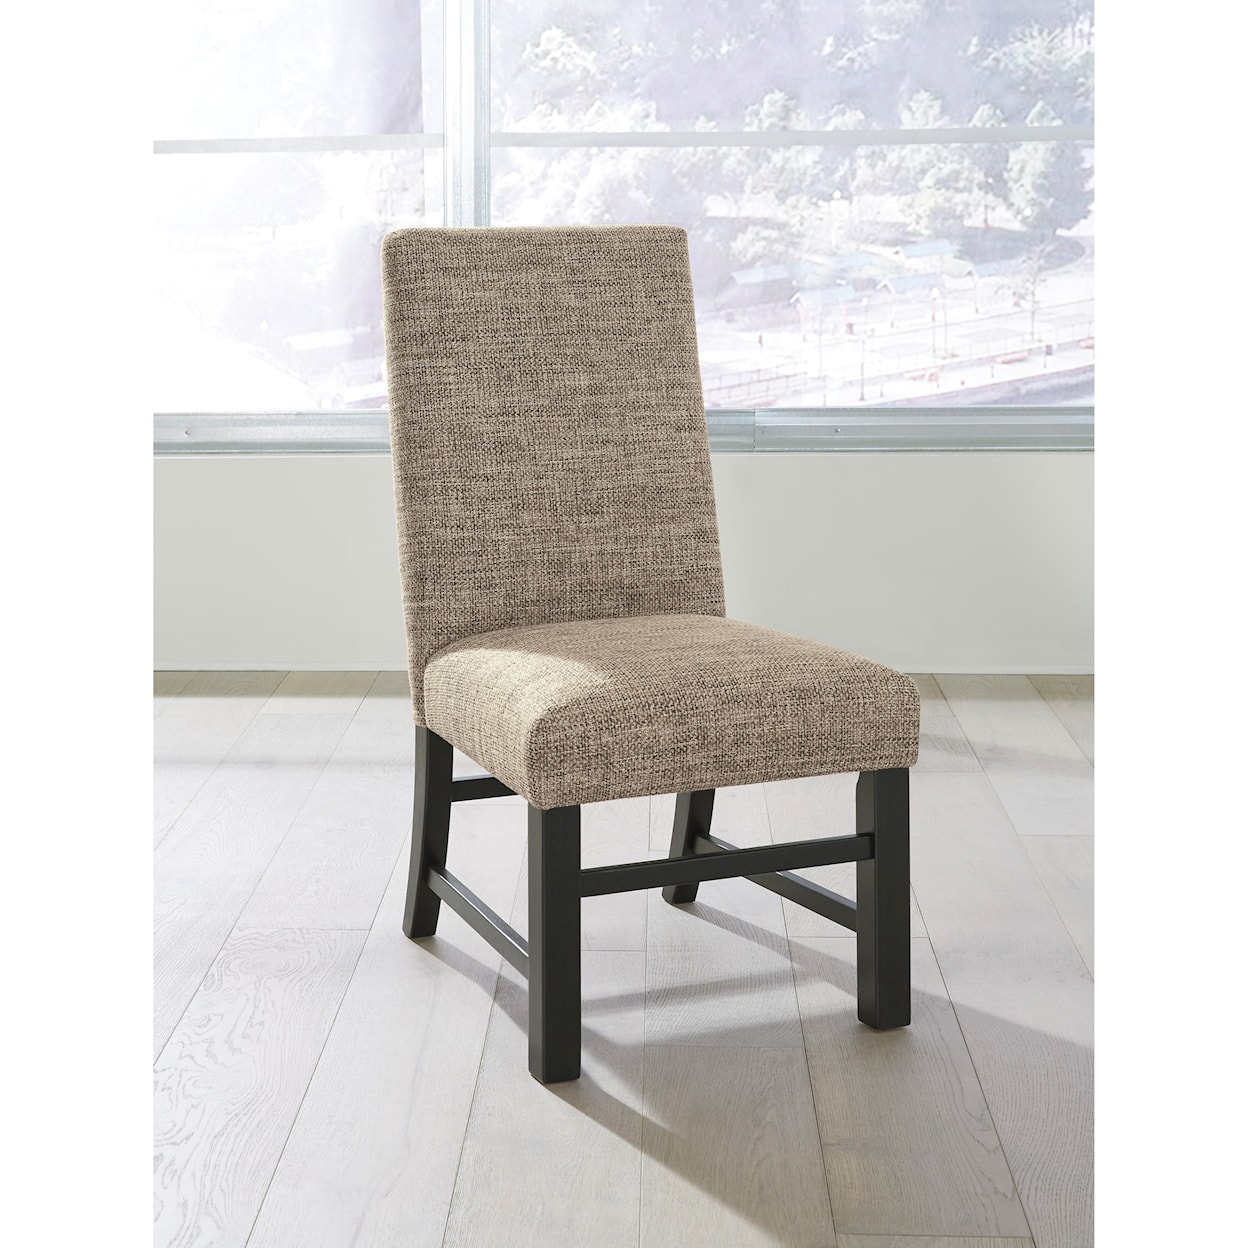 Signature Design by Ashley Sommerford Dining Upholstered Side Chair